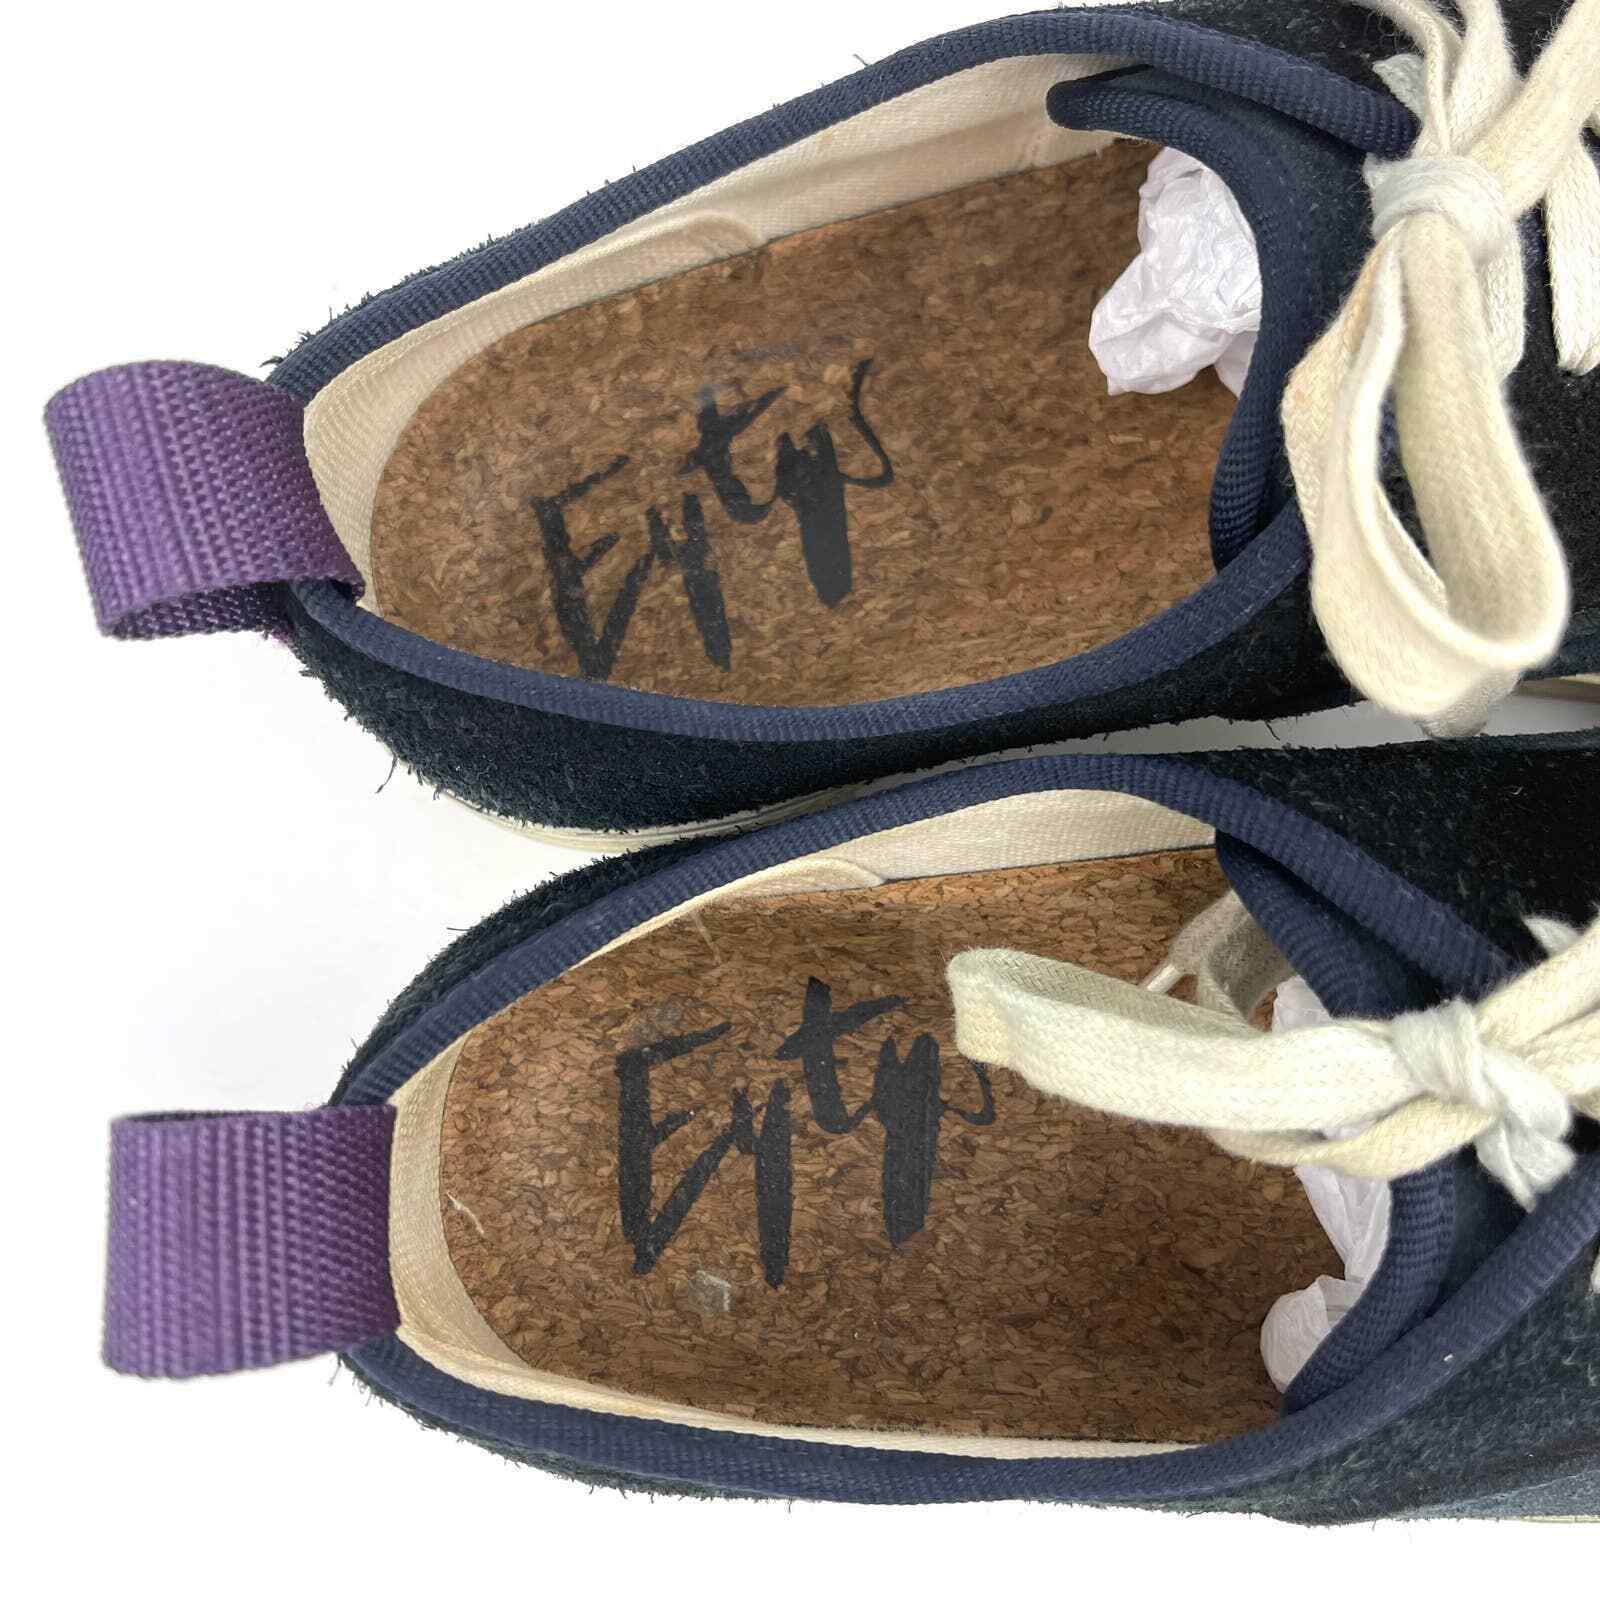 EYTYS Shoes Womens 9 Navy Mother Suede Lace Up sk… - image 5